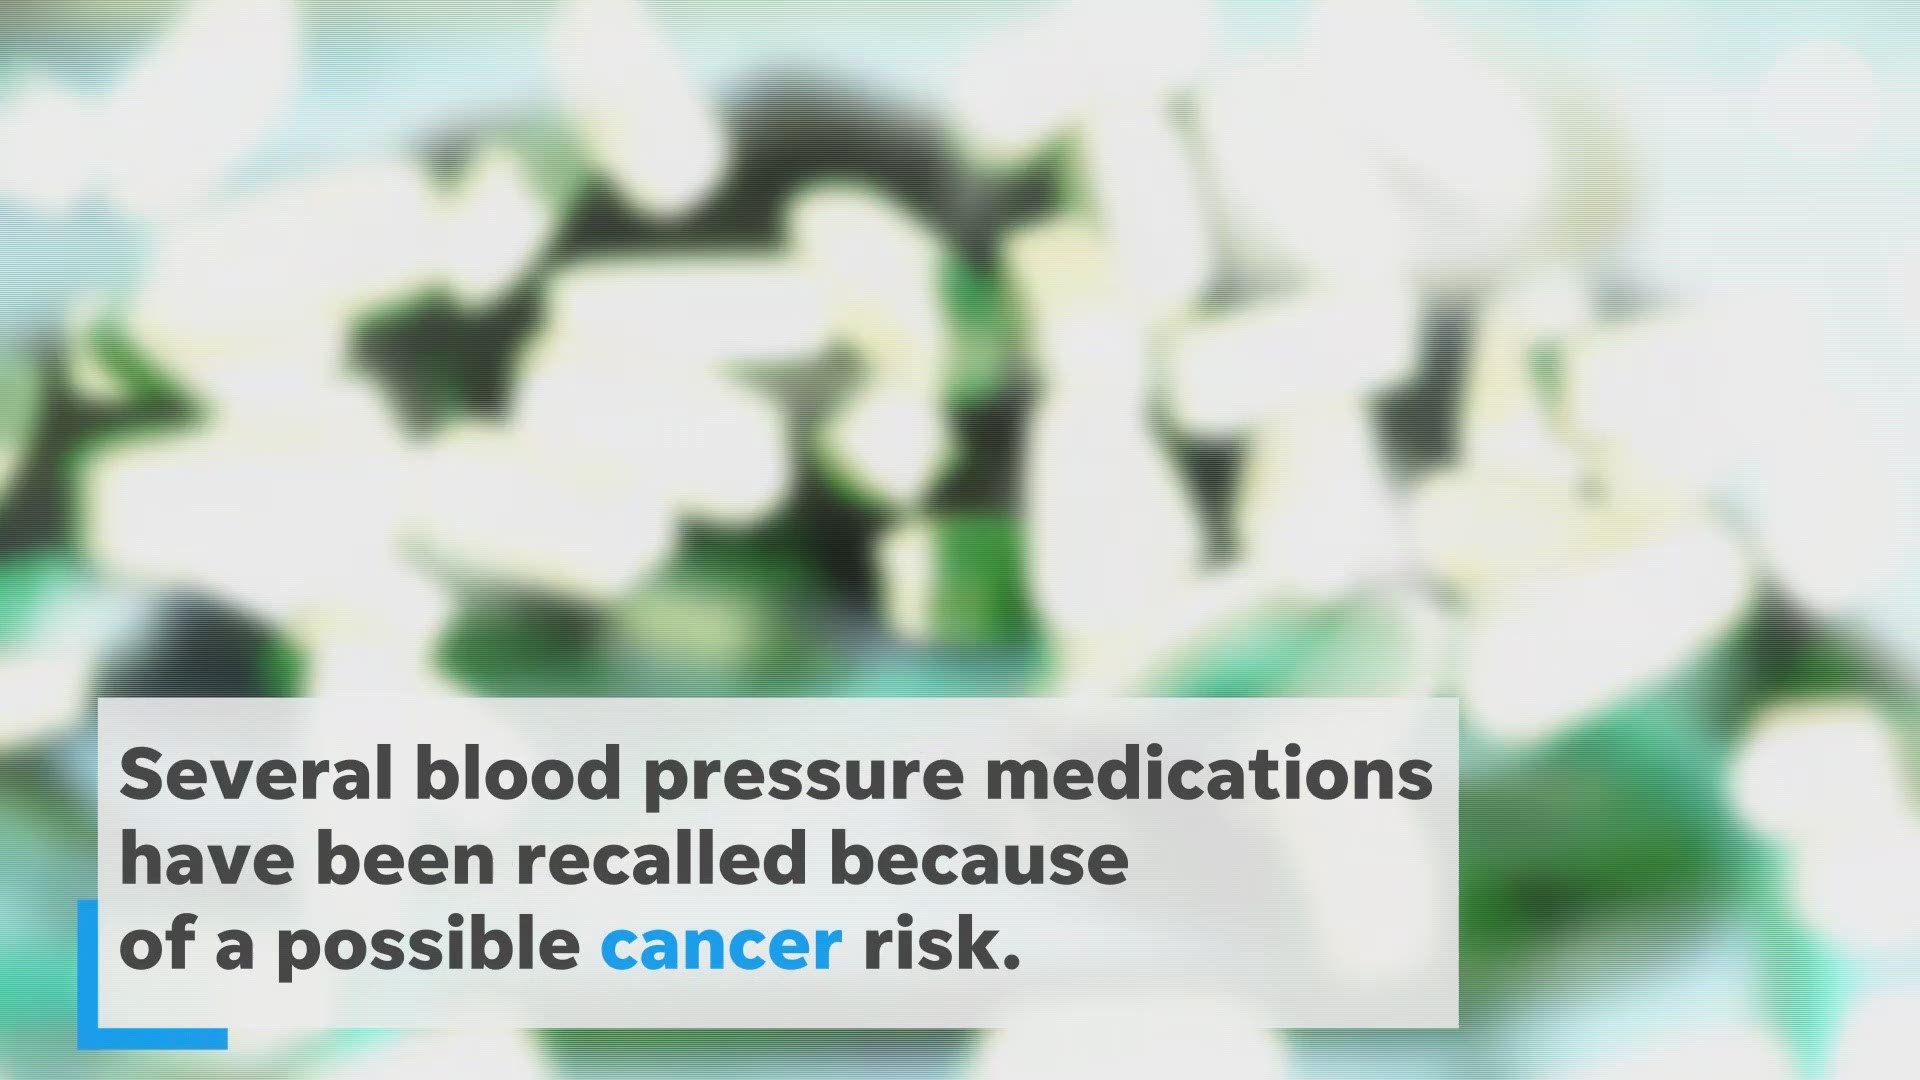 Teva Pharmaceuticals has launched a voluntary recall into two drugs used to treat high blood pressure as more medications face concerns over a possible cancer risk.